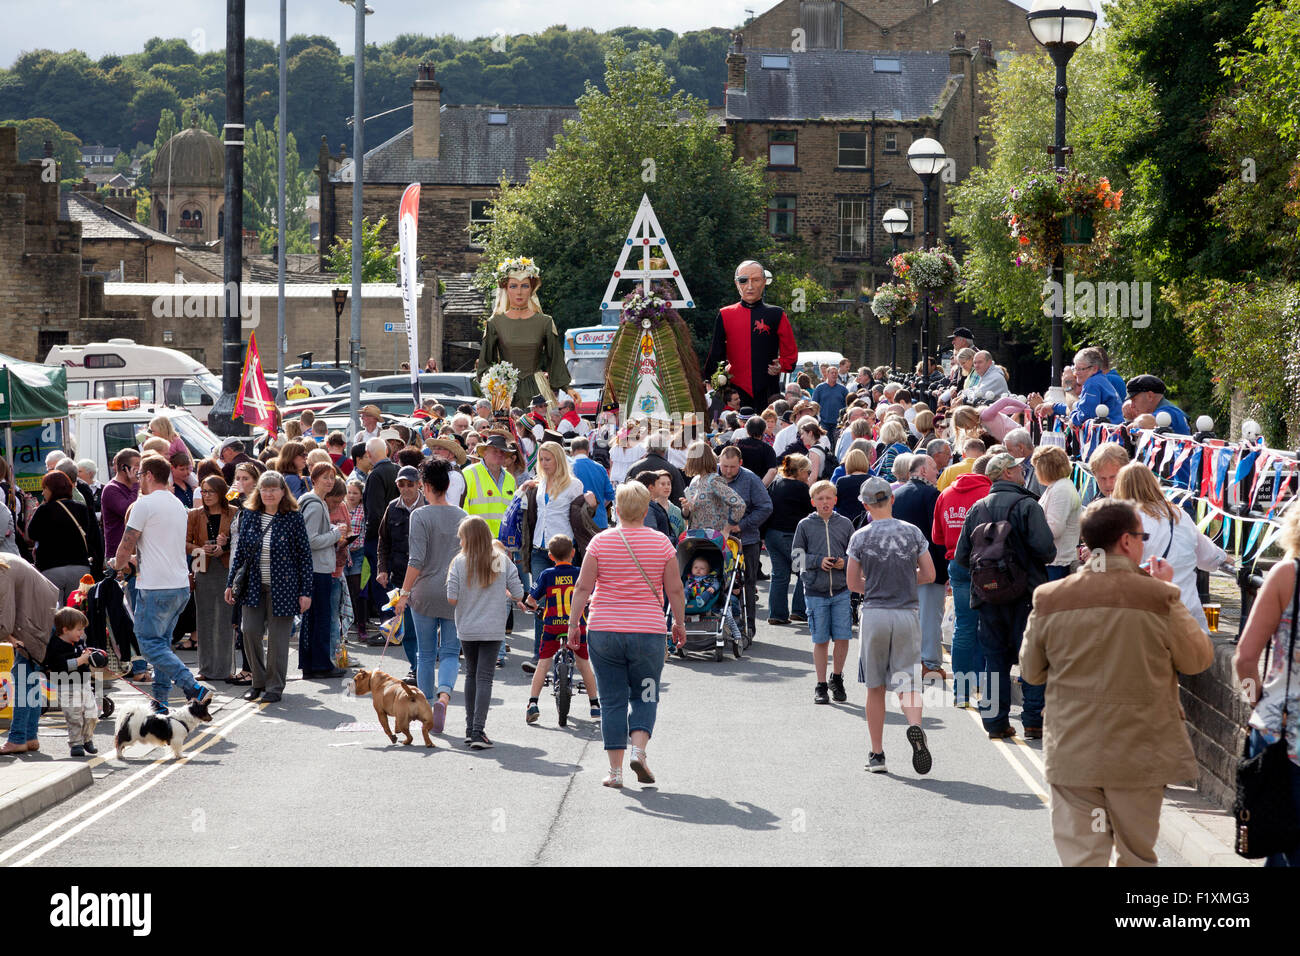 Crowd of visitors at the Rushbearing festival, West Yorkshire, UK Stock Photo